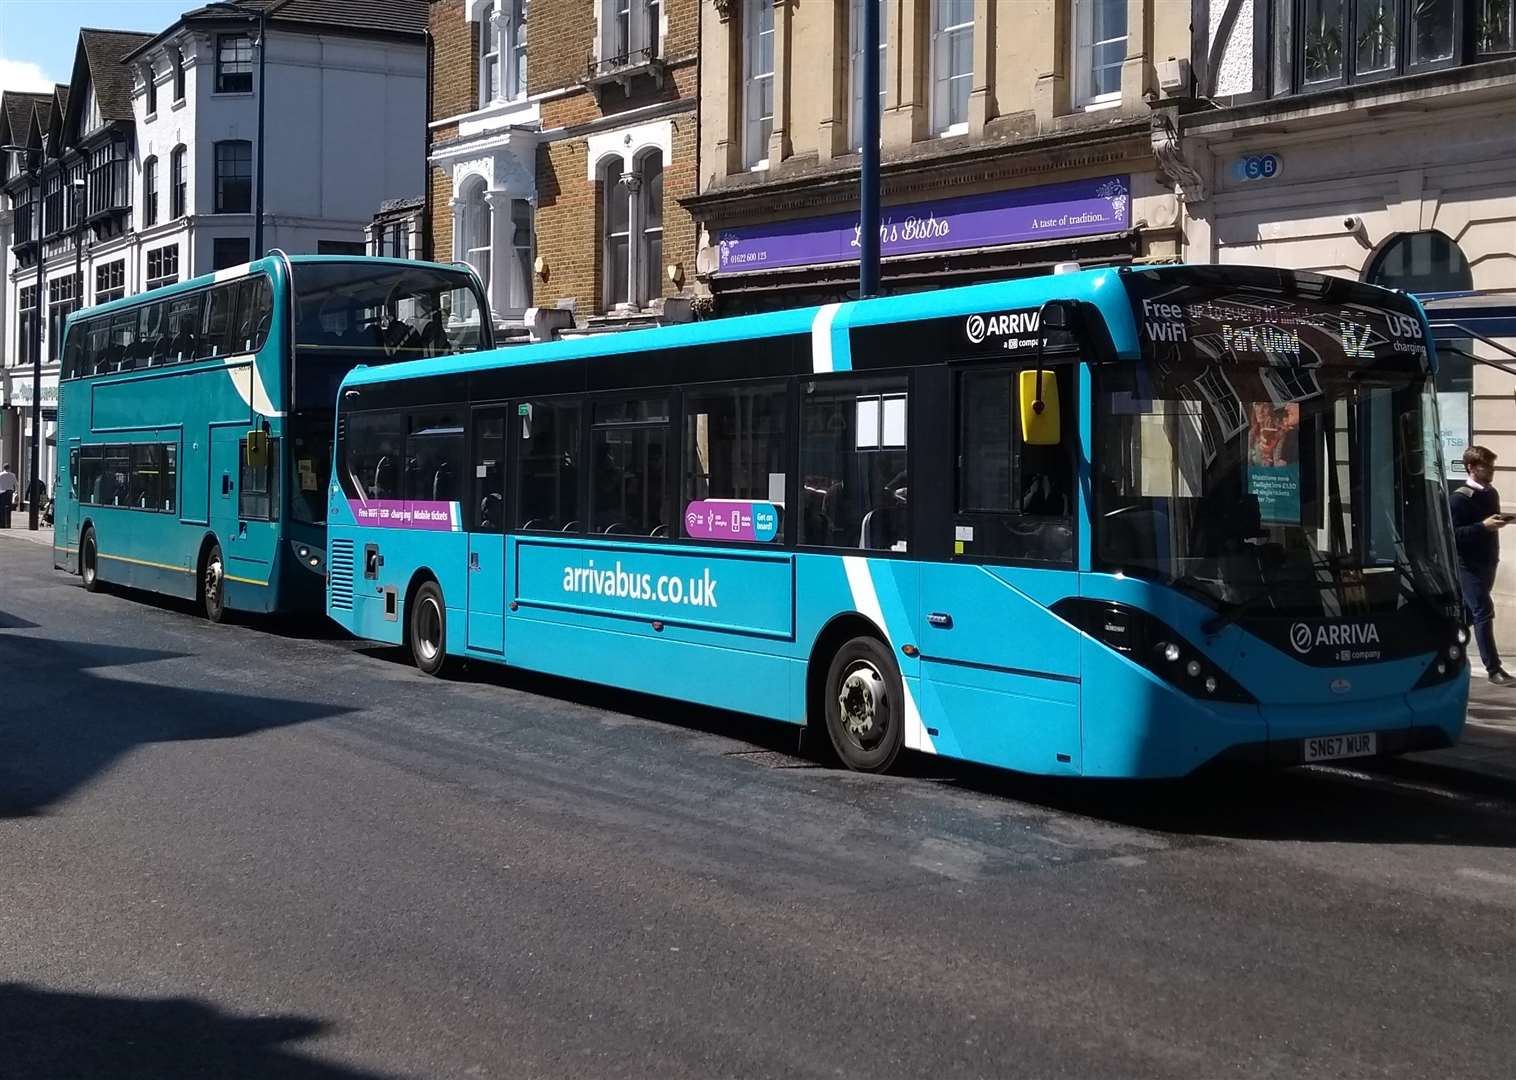 A proposal to replace services with 'feeder buses' has been put up for consultation